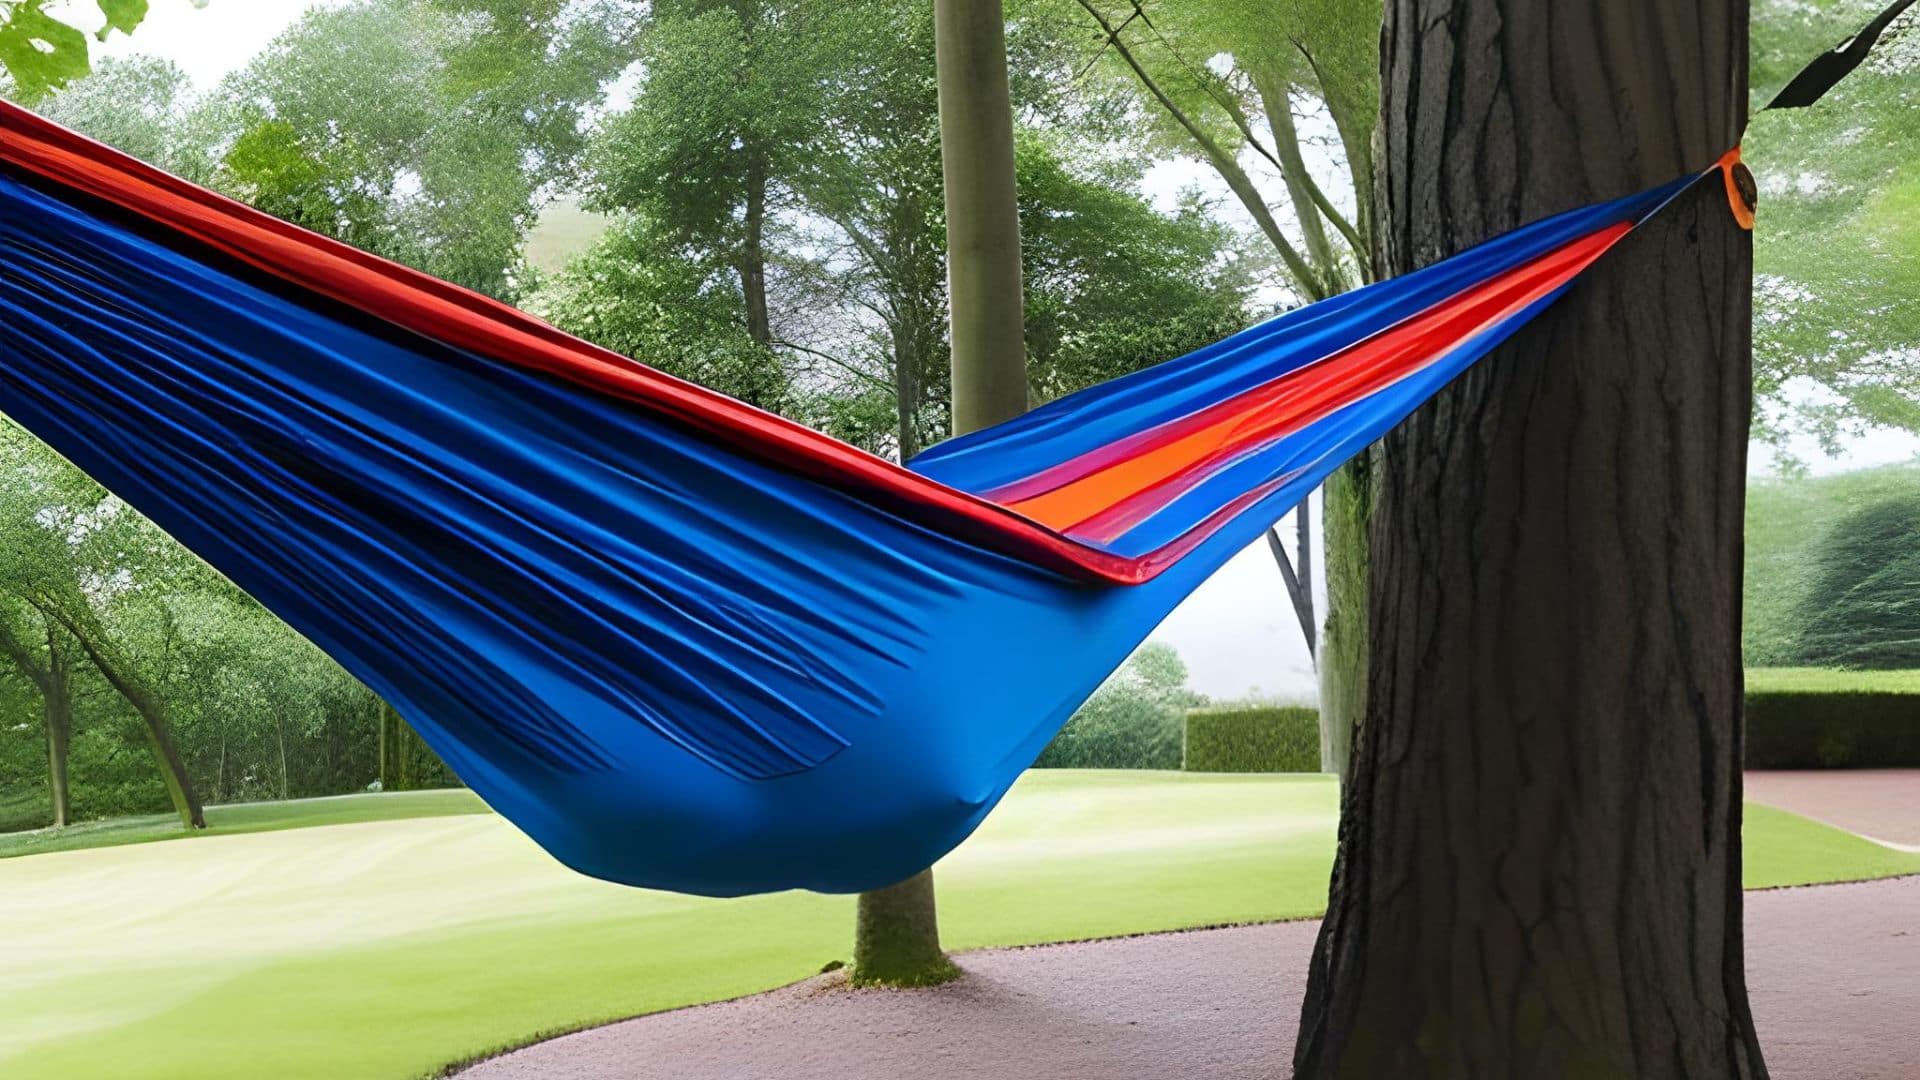 How Do You Wrap the Straps around Tree for Hammock